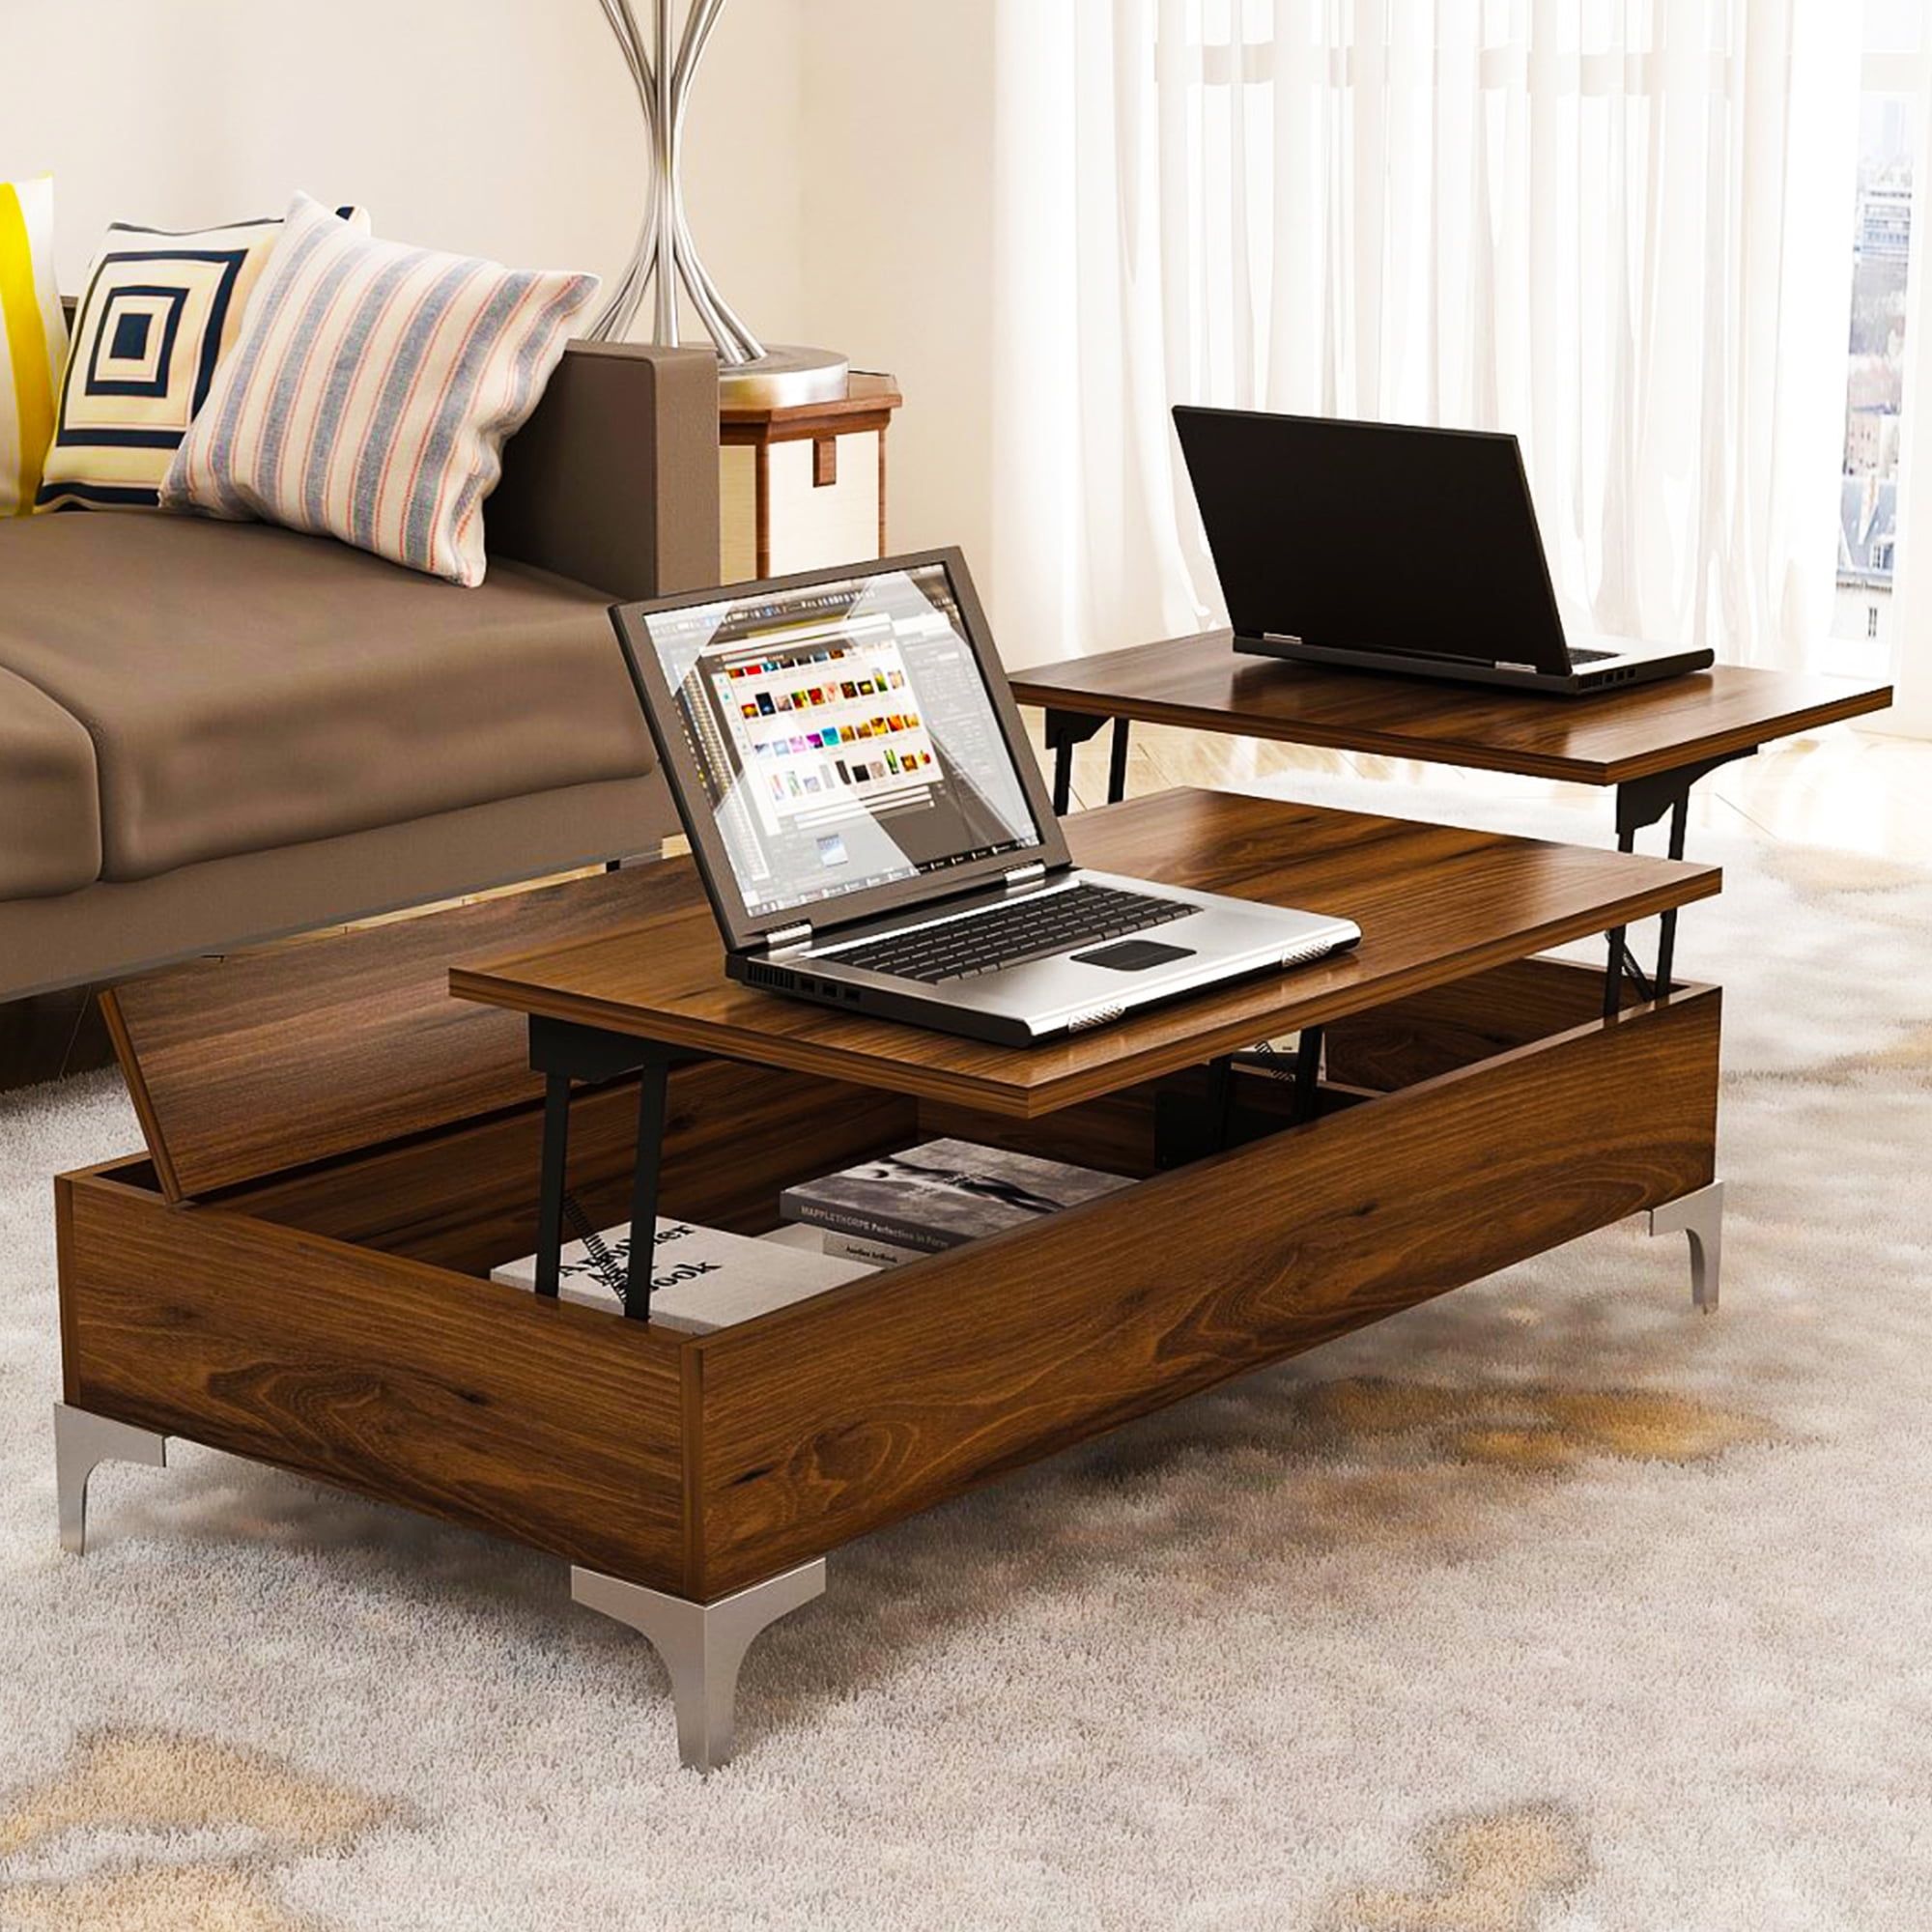 Lift Top Coffee Table, Adjustable Wood Table With Hidden Storage Throughout Lift Top Coffee Tables With Storage (View 6 of 15)